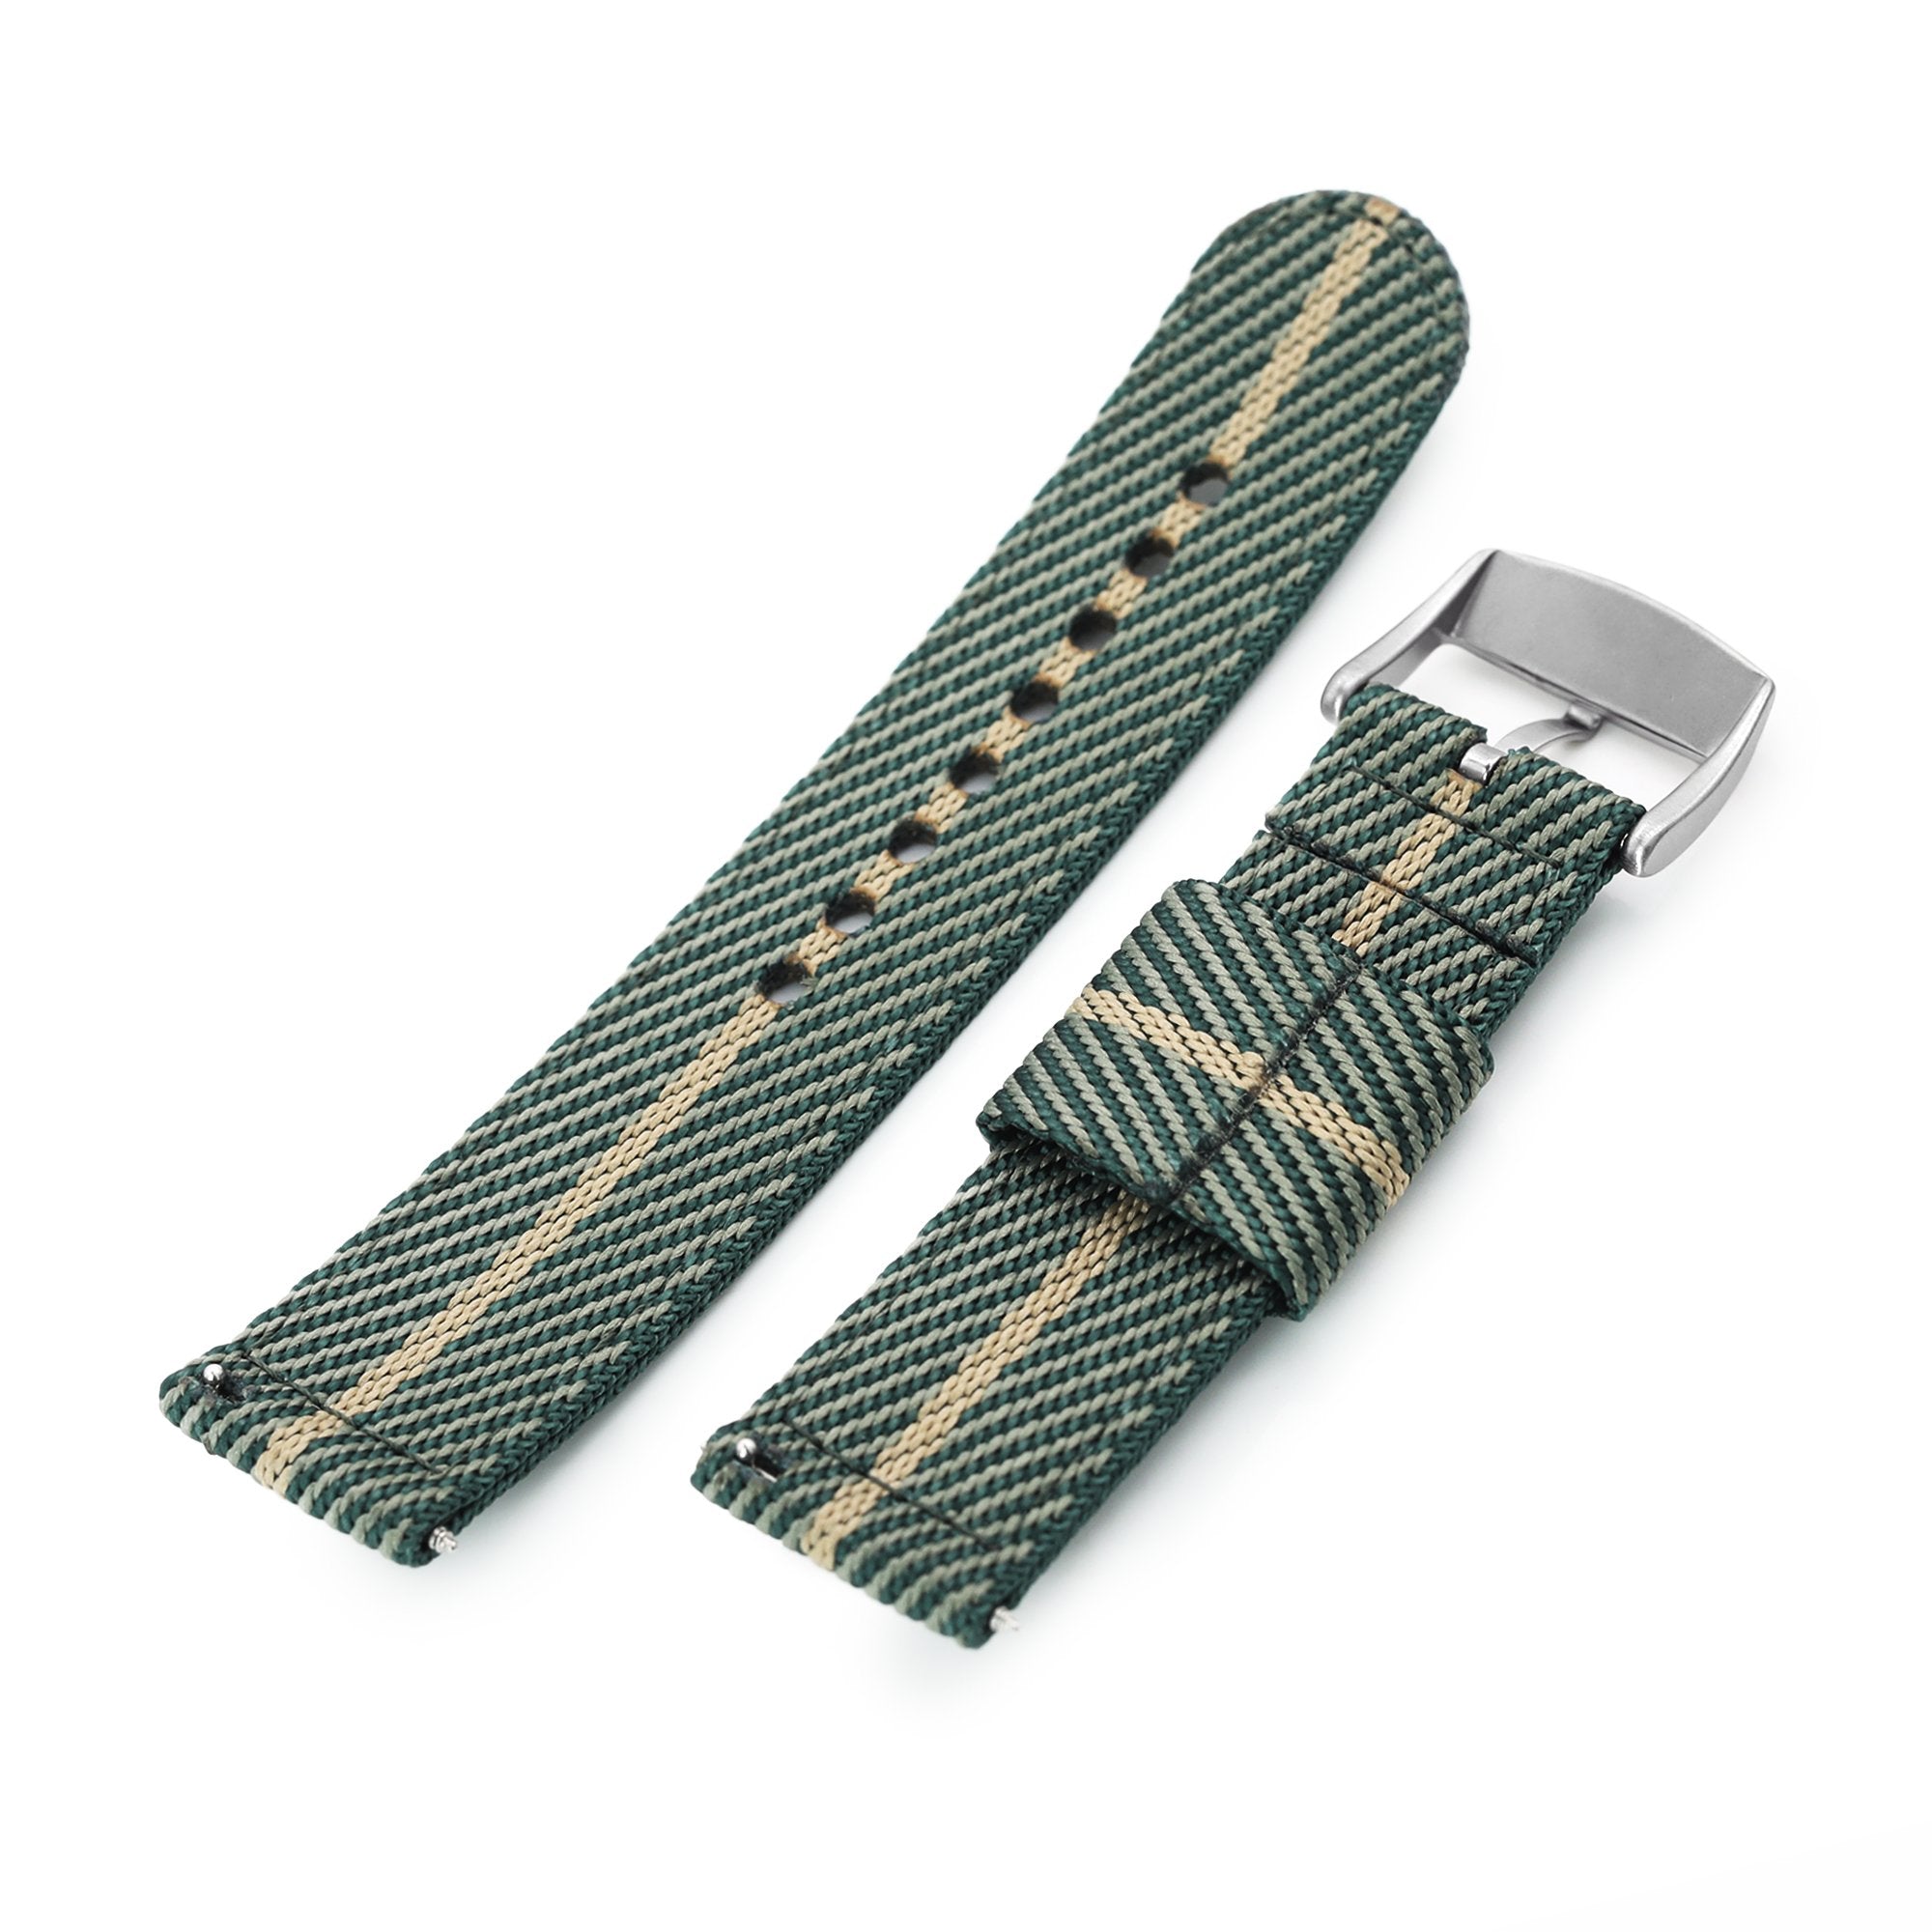 22mm 2-pcs Nylon Watch Band, Quick Release, Green & Khaki, Brushed Buckle Strapcode Watch Bands